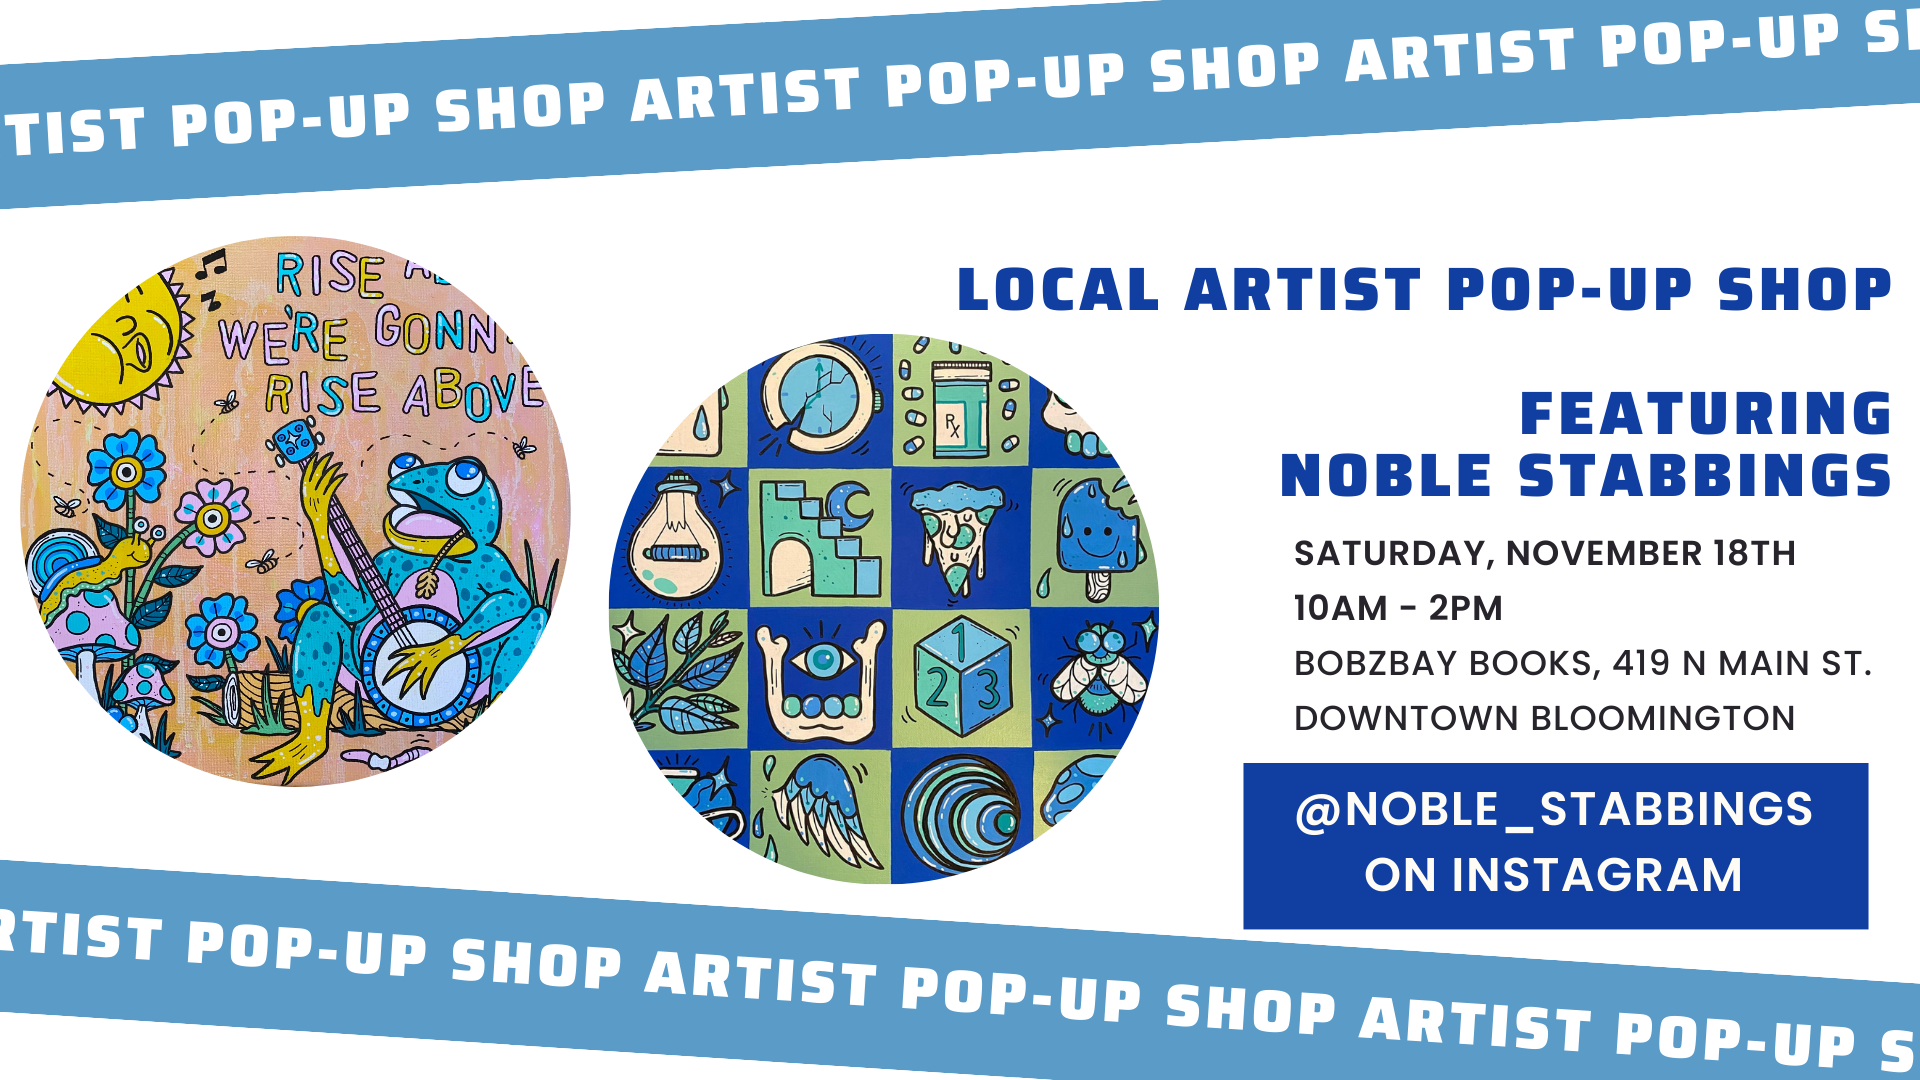 Art Pop-Up Shop with Local Artist Noble Stabbings